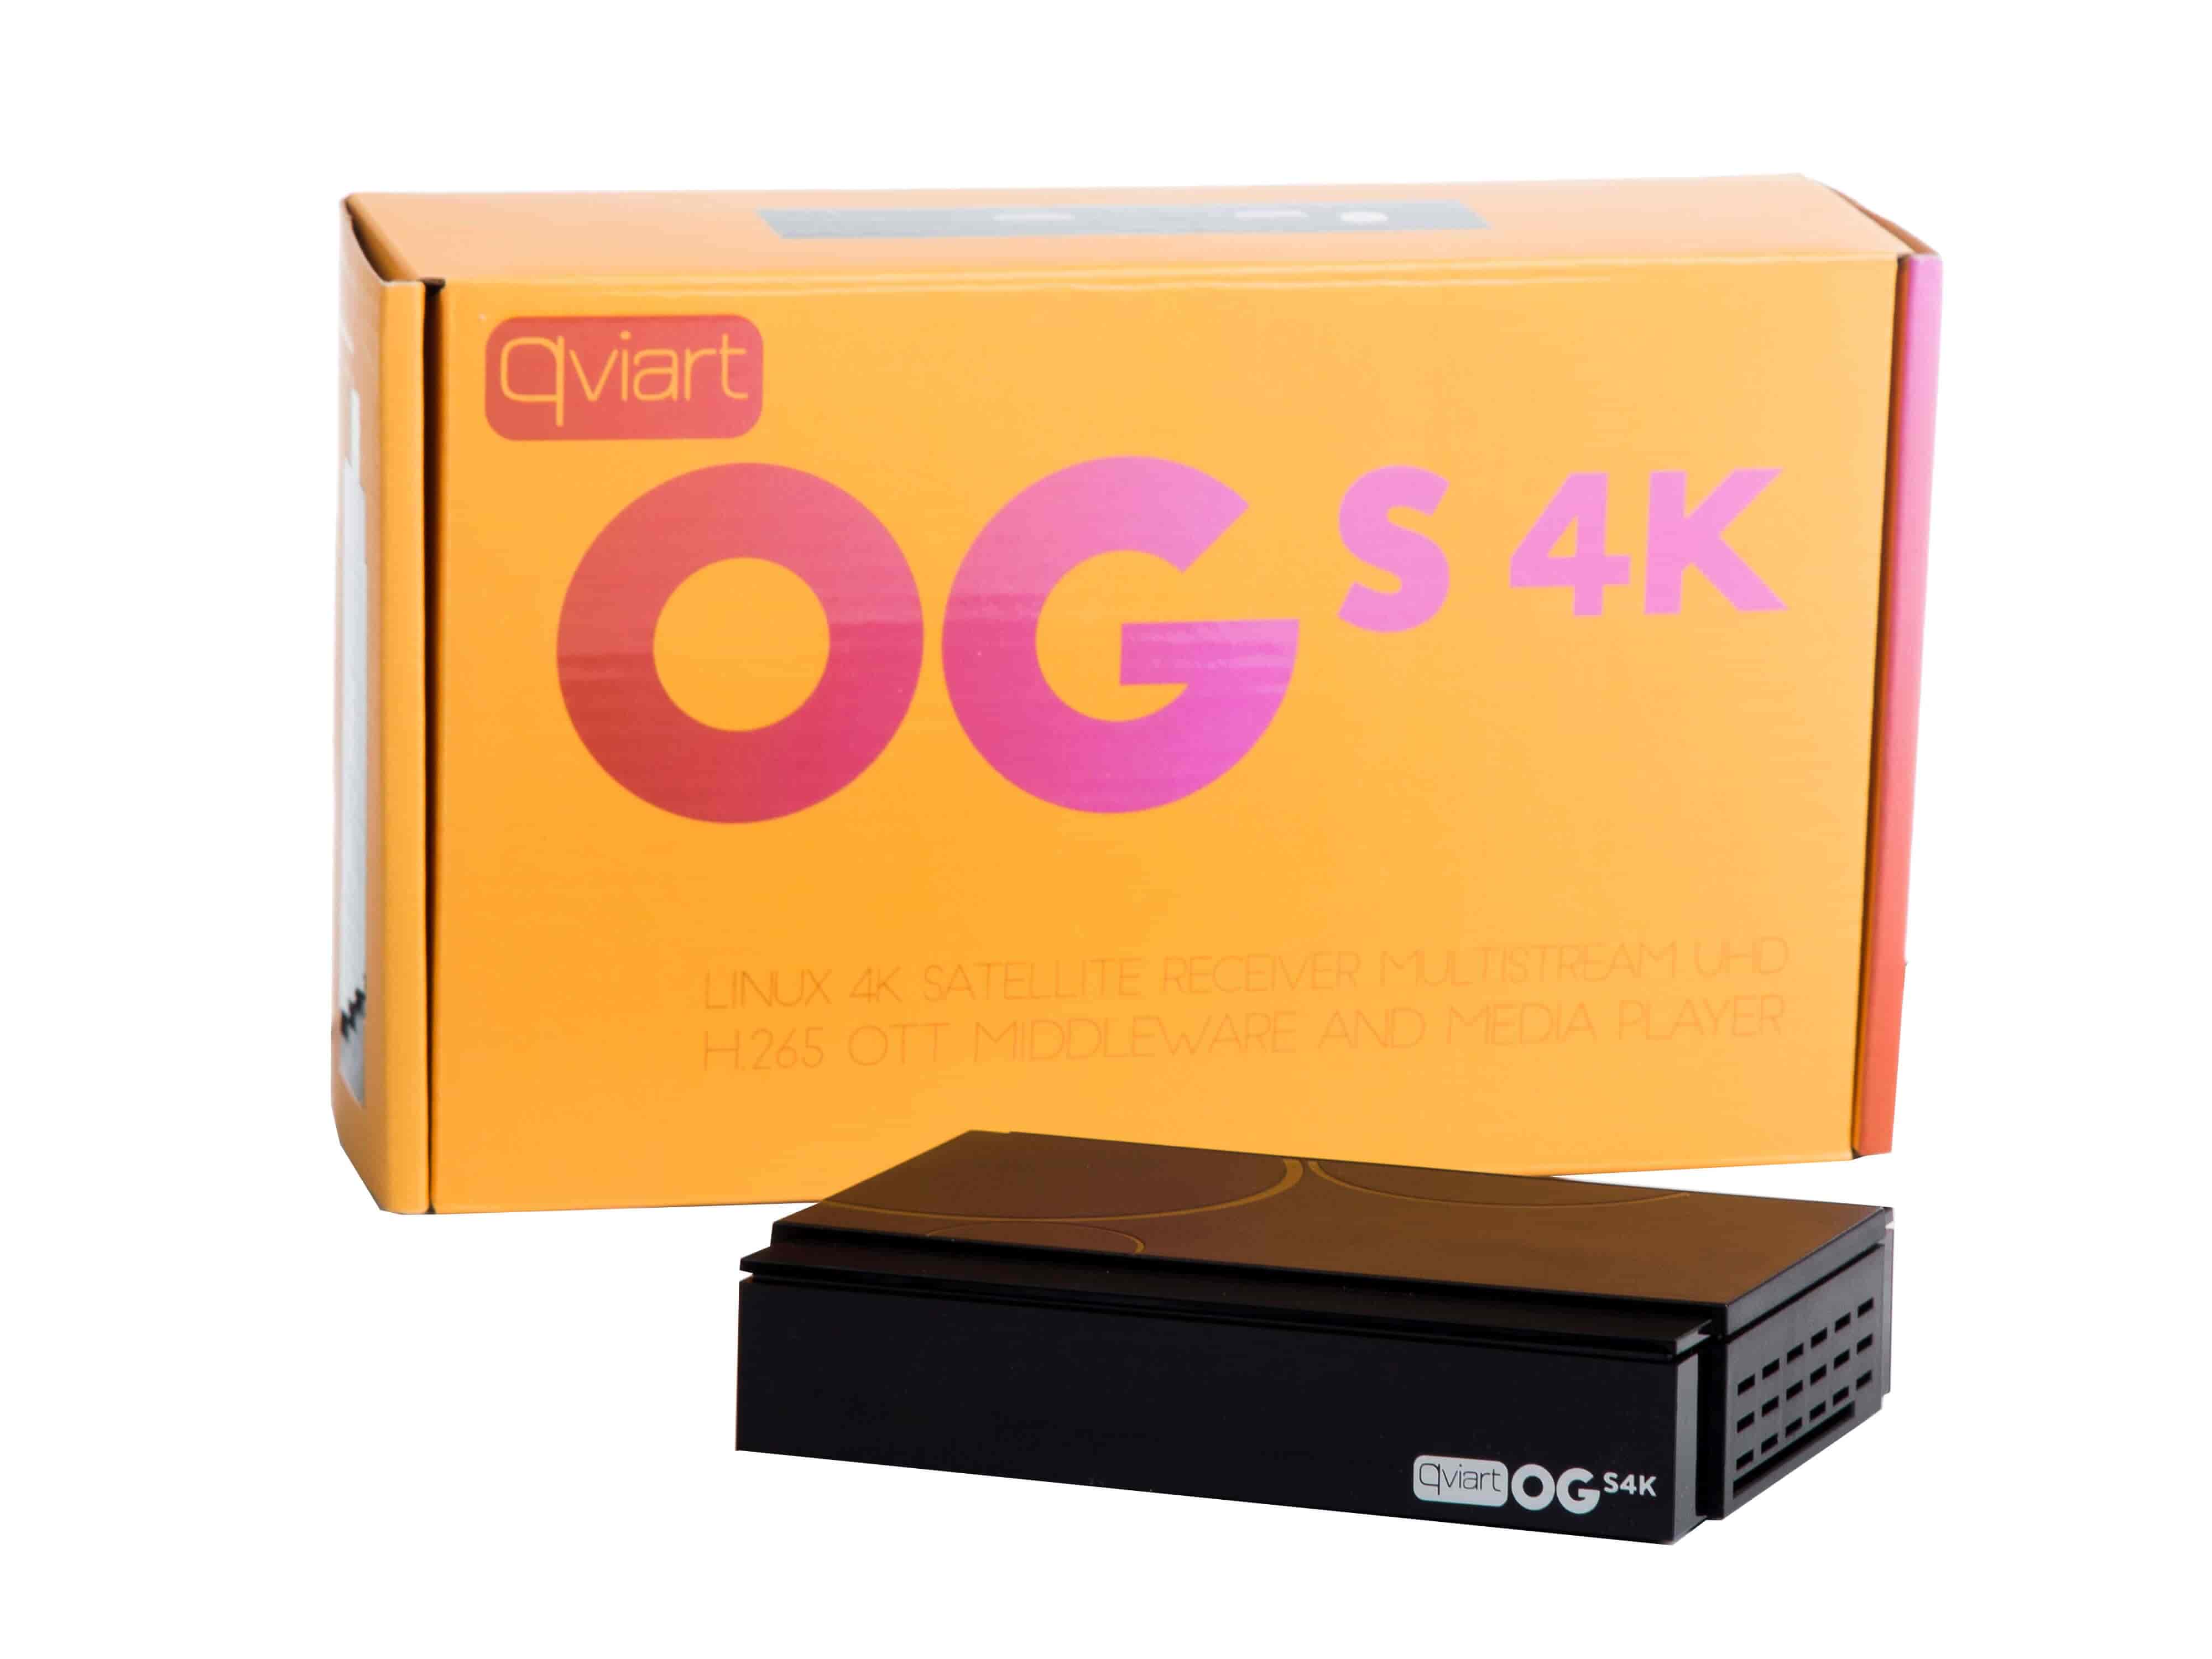 Qviart OGs 4K UHD DVB-S2 and IPTV Combo STBQviart OGs 4K is a powerful, stable, fast and user-friendly 4K UHD DVB-S2 satellite receiver and IPTV receiver. Qviart OGs 4K Linux Satellite UHD Multistream OTT 4K H.265 media receiver is for you, if you want things simple and efficient in a full 4K IPTV DVB-S2 Set Top Box - at a super sharp price. Qviart OGs 4K offers a wide range of features such as import and export of Enigma2 channel lists, EPG, Auto fast scan, PVR option and timeshift. On the IPTV you will find the latest QTV Online TV (Stalker) application as well as Xtream and M3U. Several IPTV features guarantee the full IPTV experience in this small but powerful 4K UHD TV box, which also supports applications such as Netflix, Amazon prime, YouTube, etc. Combined 4K UHD DVB-S2 SAT receiver and IPTV TV box in 4K version - at a super price.QVIART LUNIX